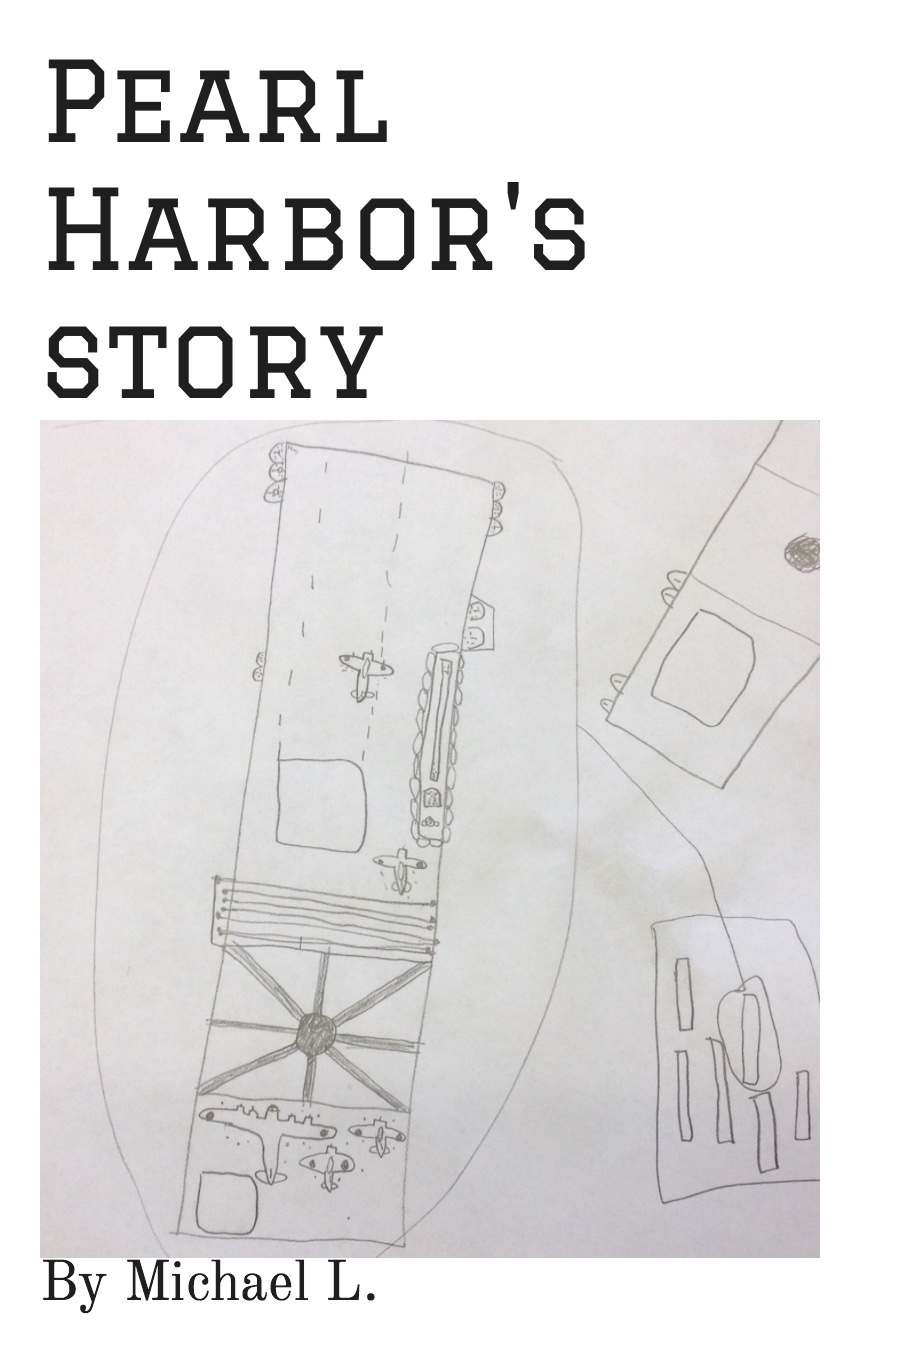 Pearl Harbor’s Story by Michael L